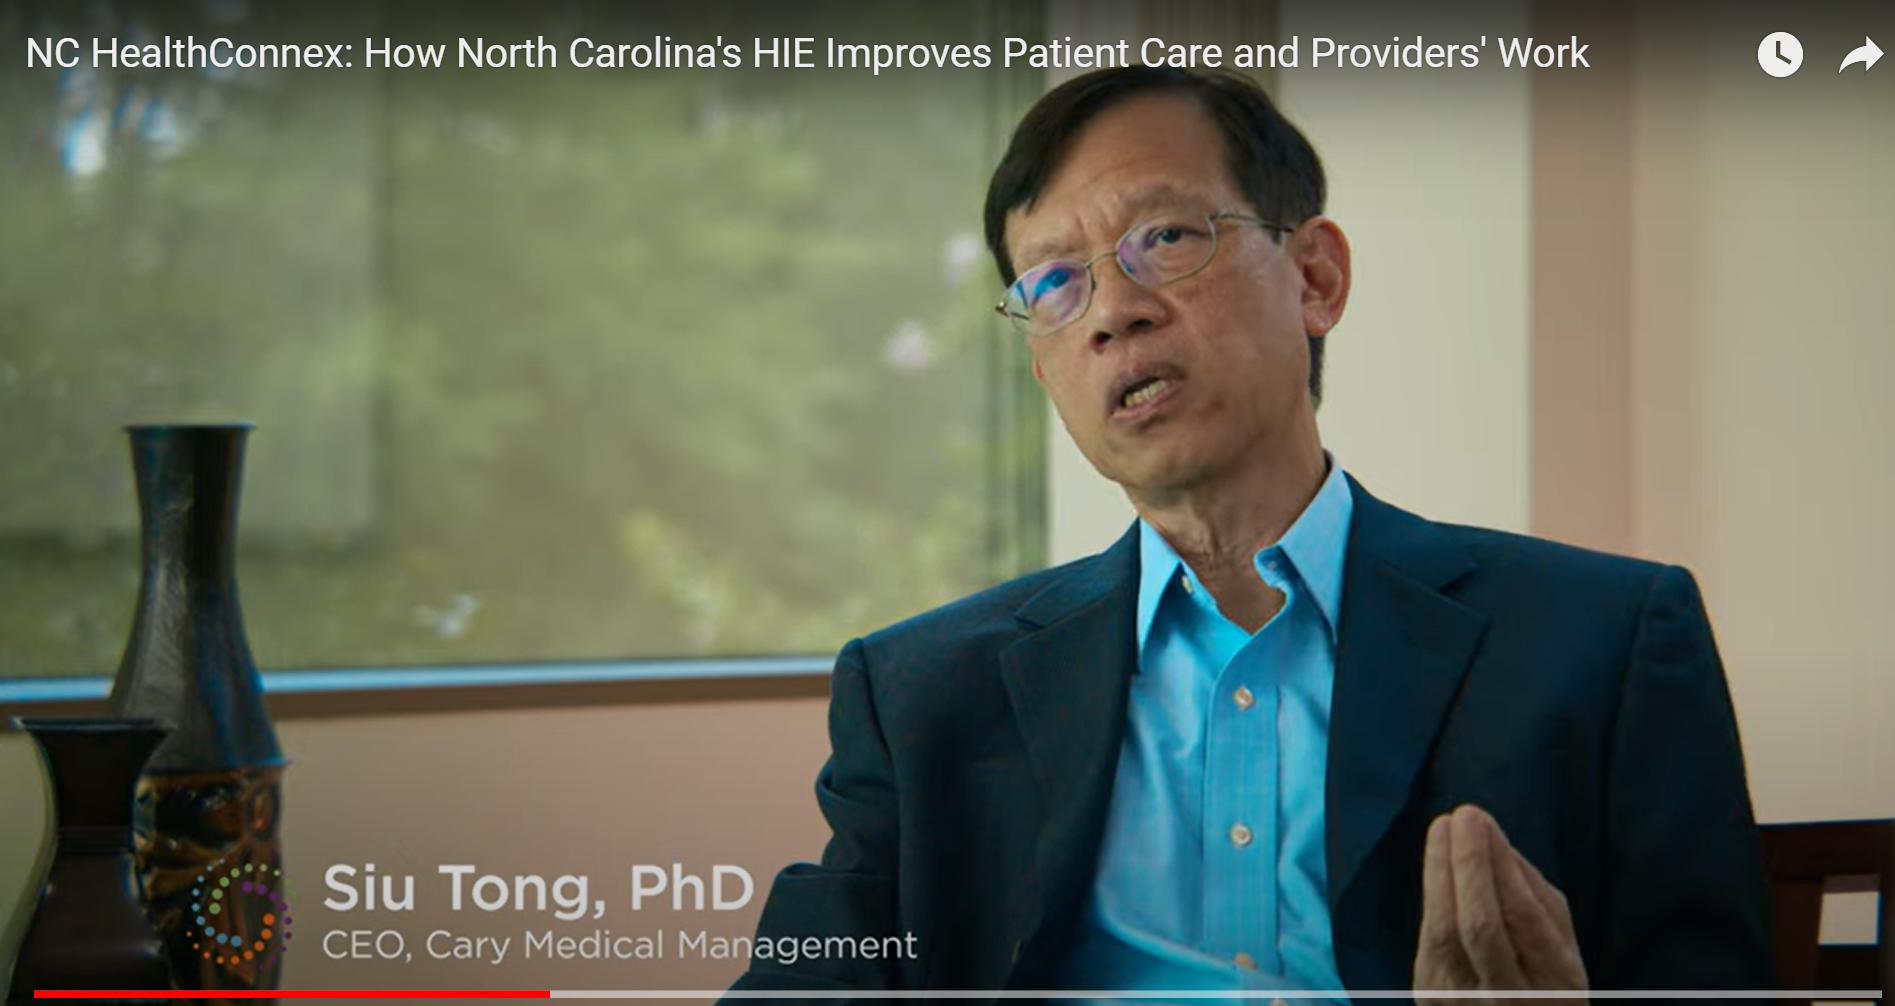 Image of CMM's Siu Tong, PhD being interviewed in the video, NC HealthConnex: How North Carolina's HIE Improves Patient Care and Providers' Work.